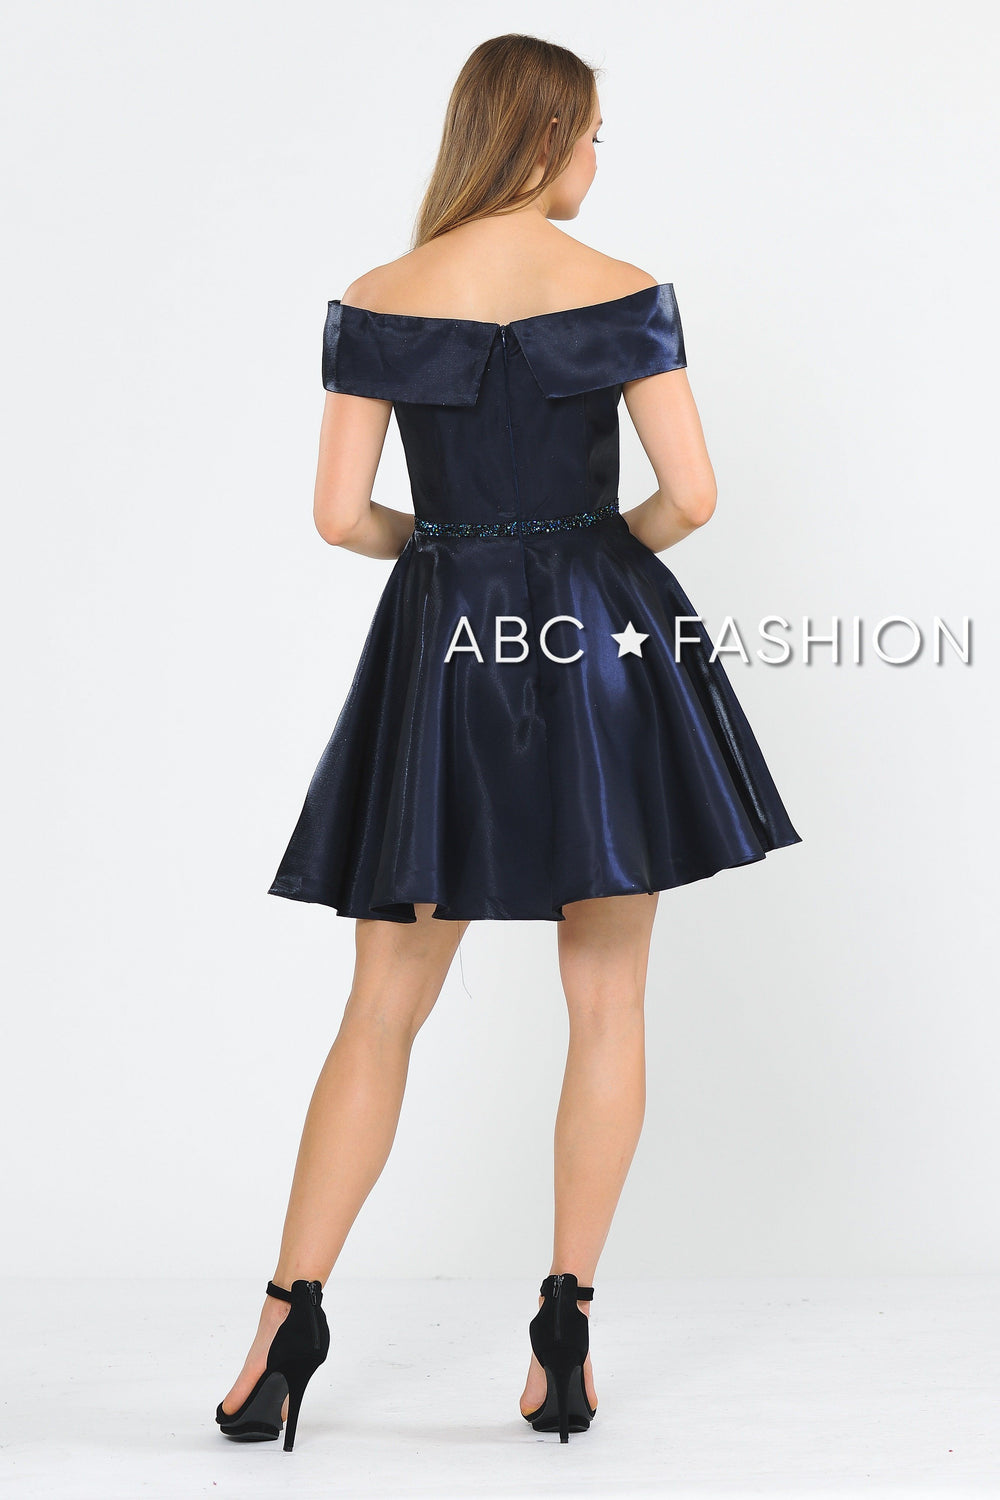 Metallic Short Off the Shoulder Dress by Poly USA 8238-Short Cocktail Dresses-ABC Fashion